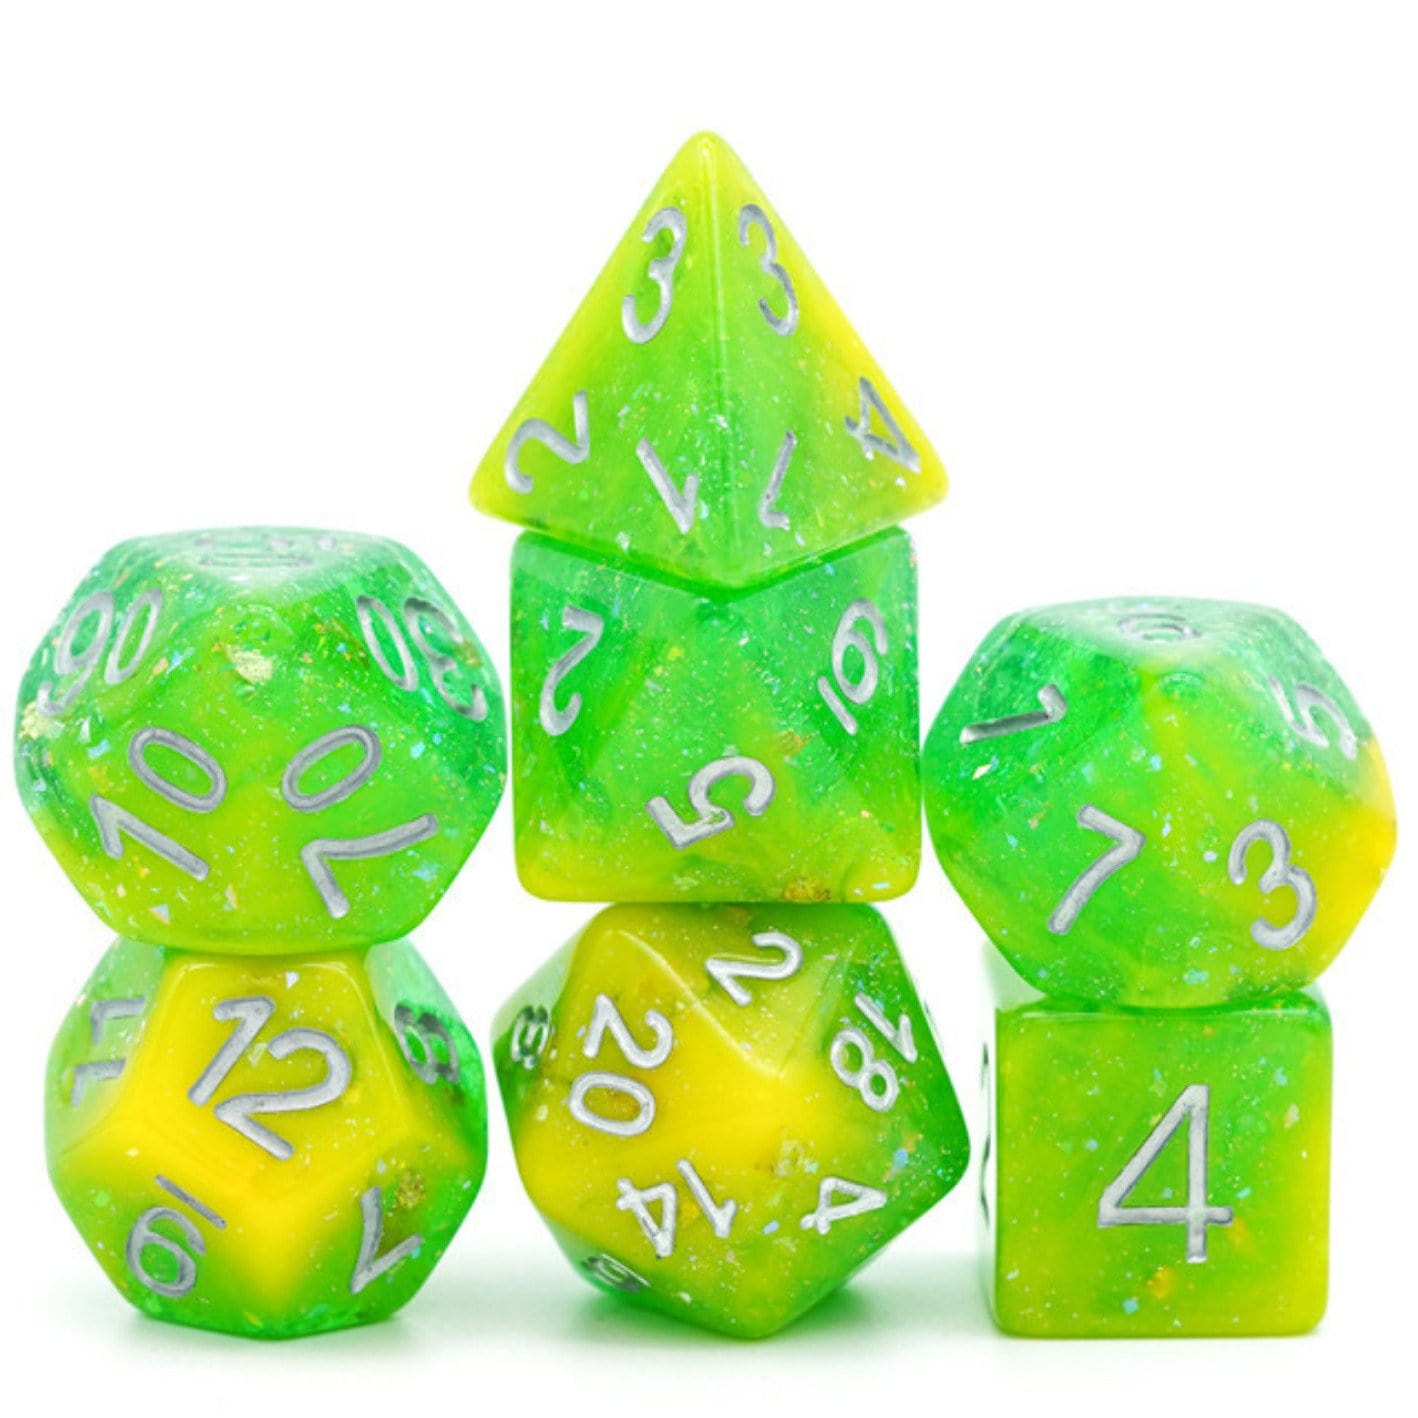 Yellow & Green Seabed Treasure RPG Dice Set - Bards & Cards